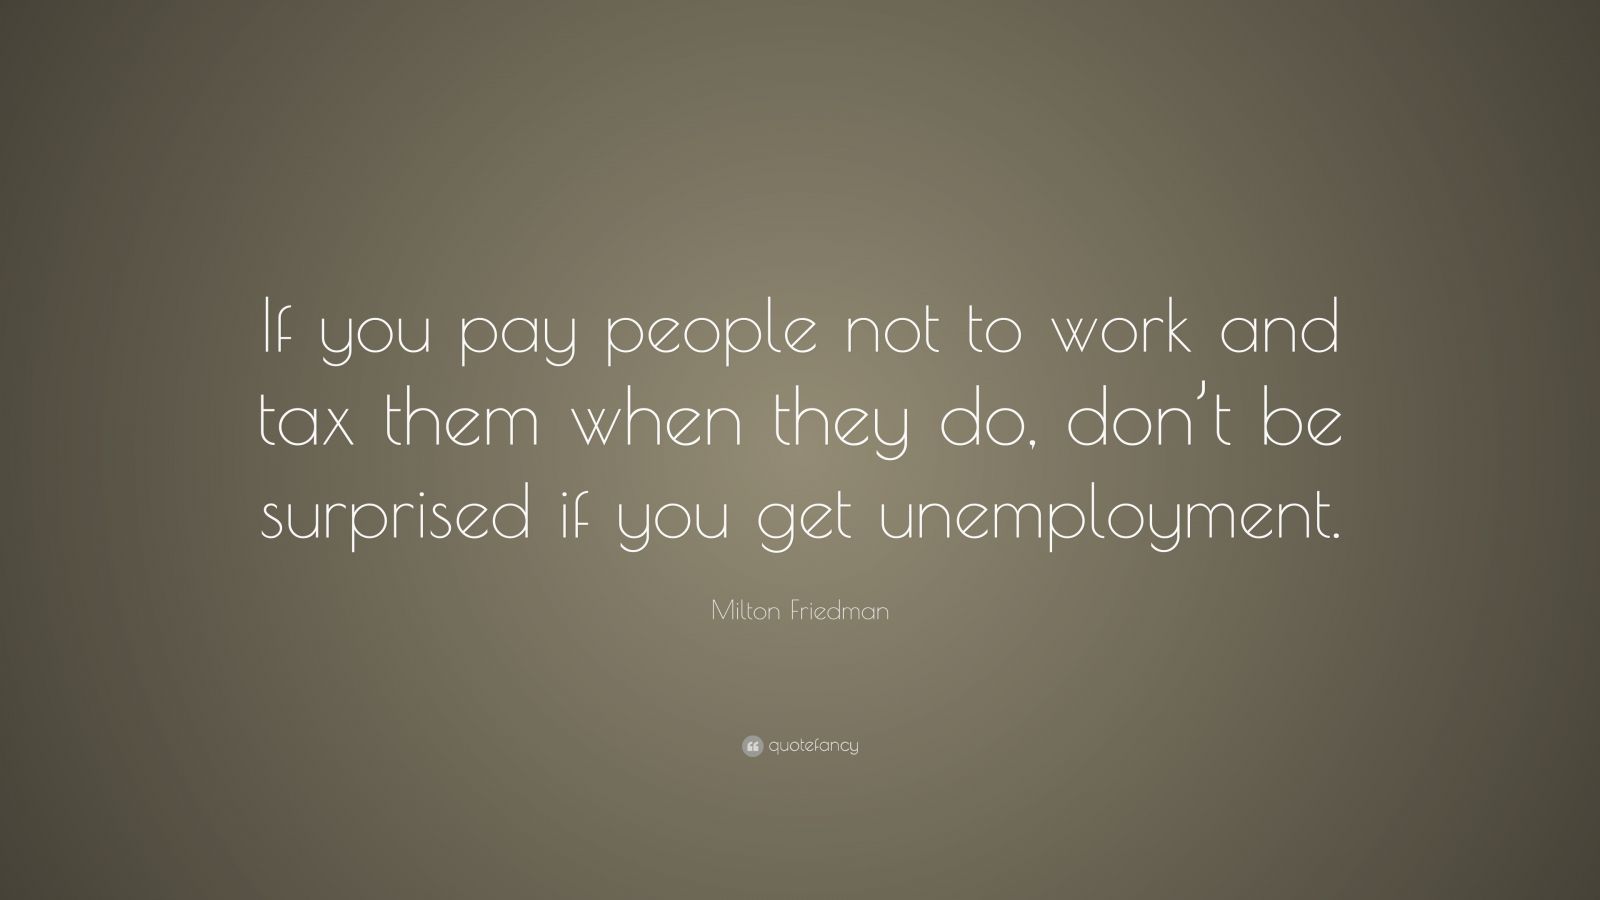 Milton Friedman Quote: “If you pay people not to work and tax them when